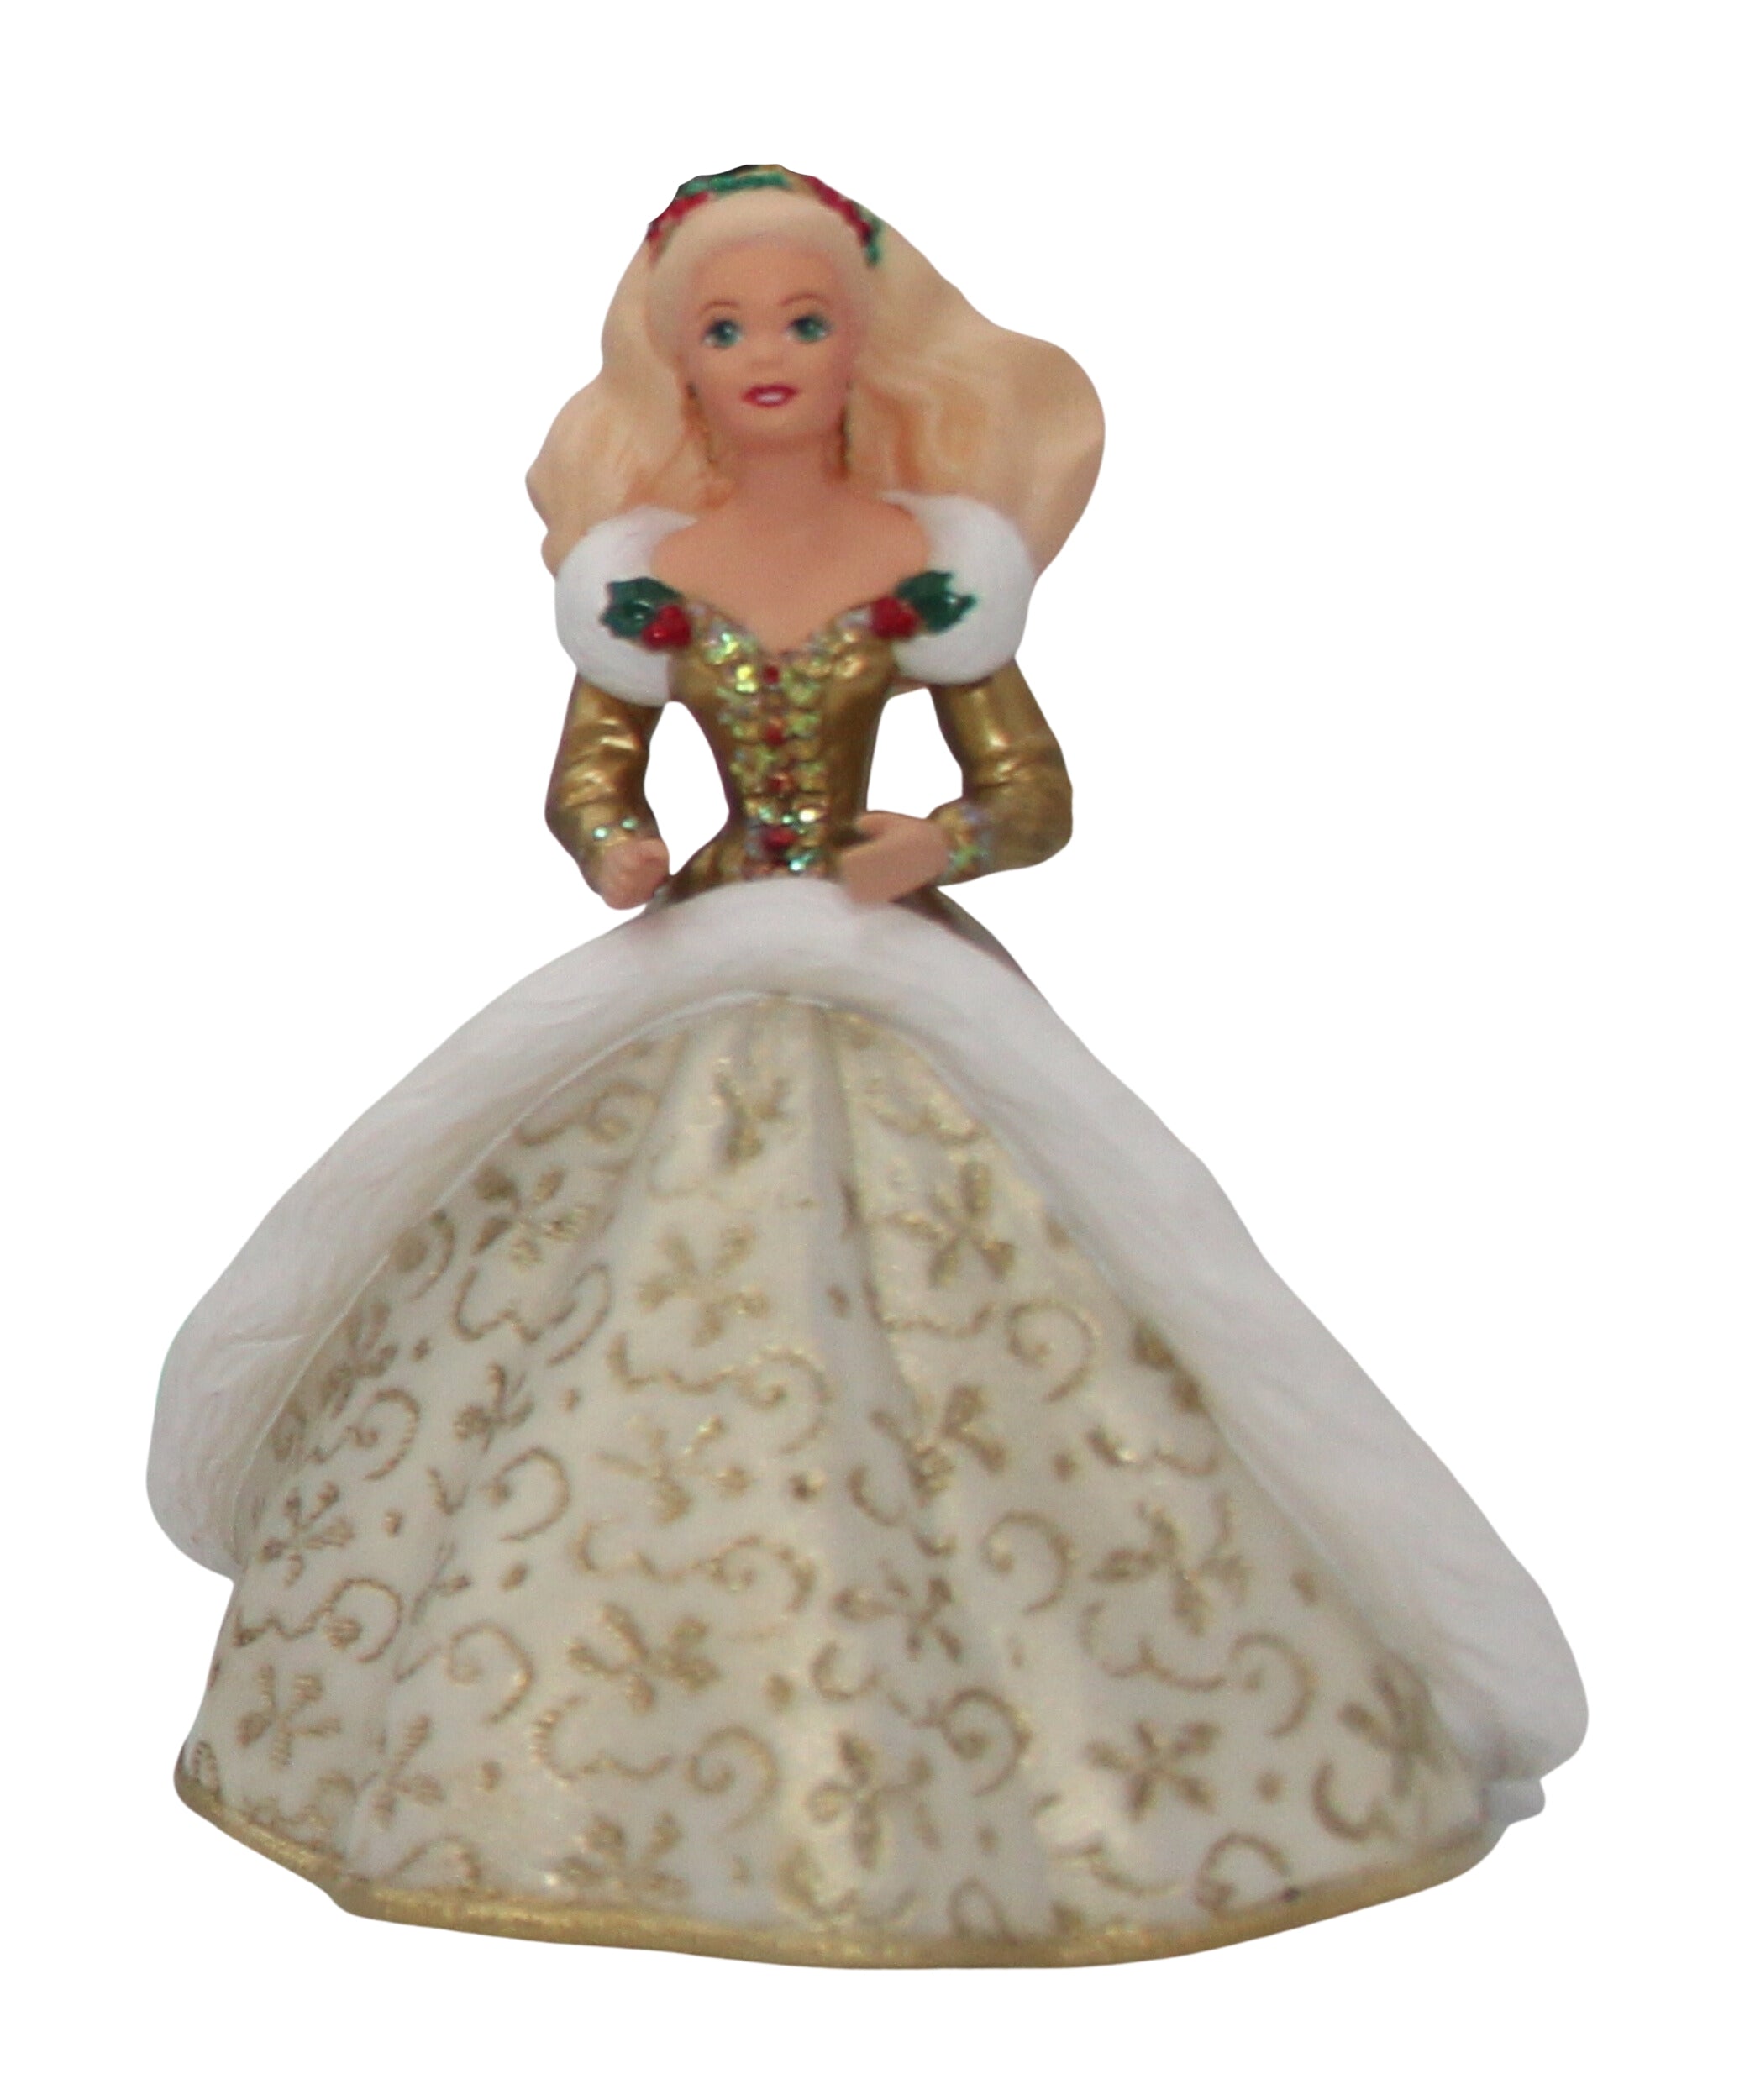 Hallmark Ornament: 1994 Holiday Barbie | QX5216 | 2nd in Series